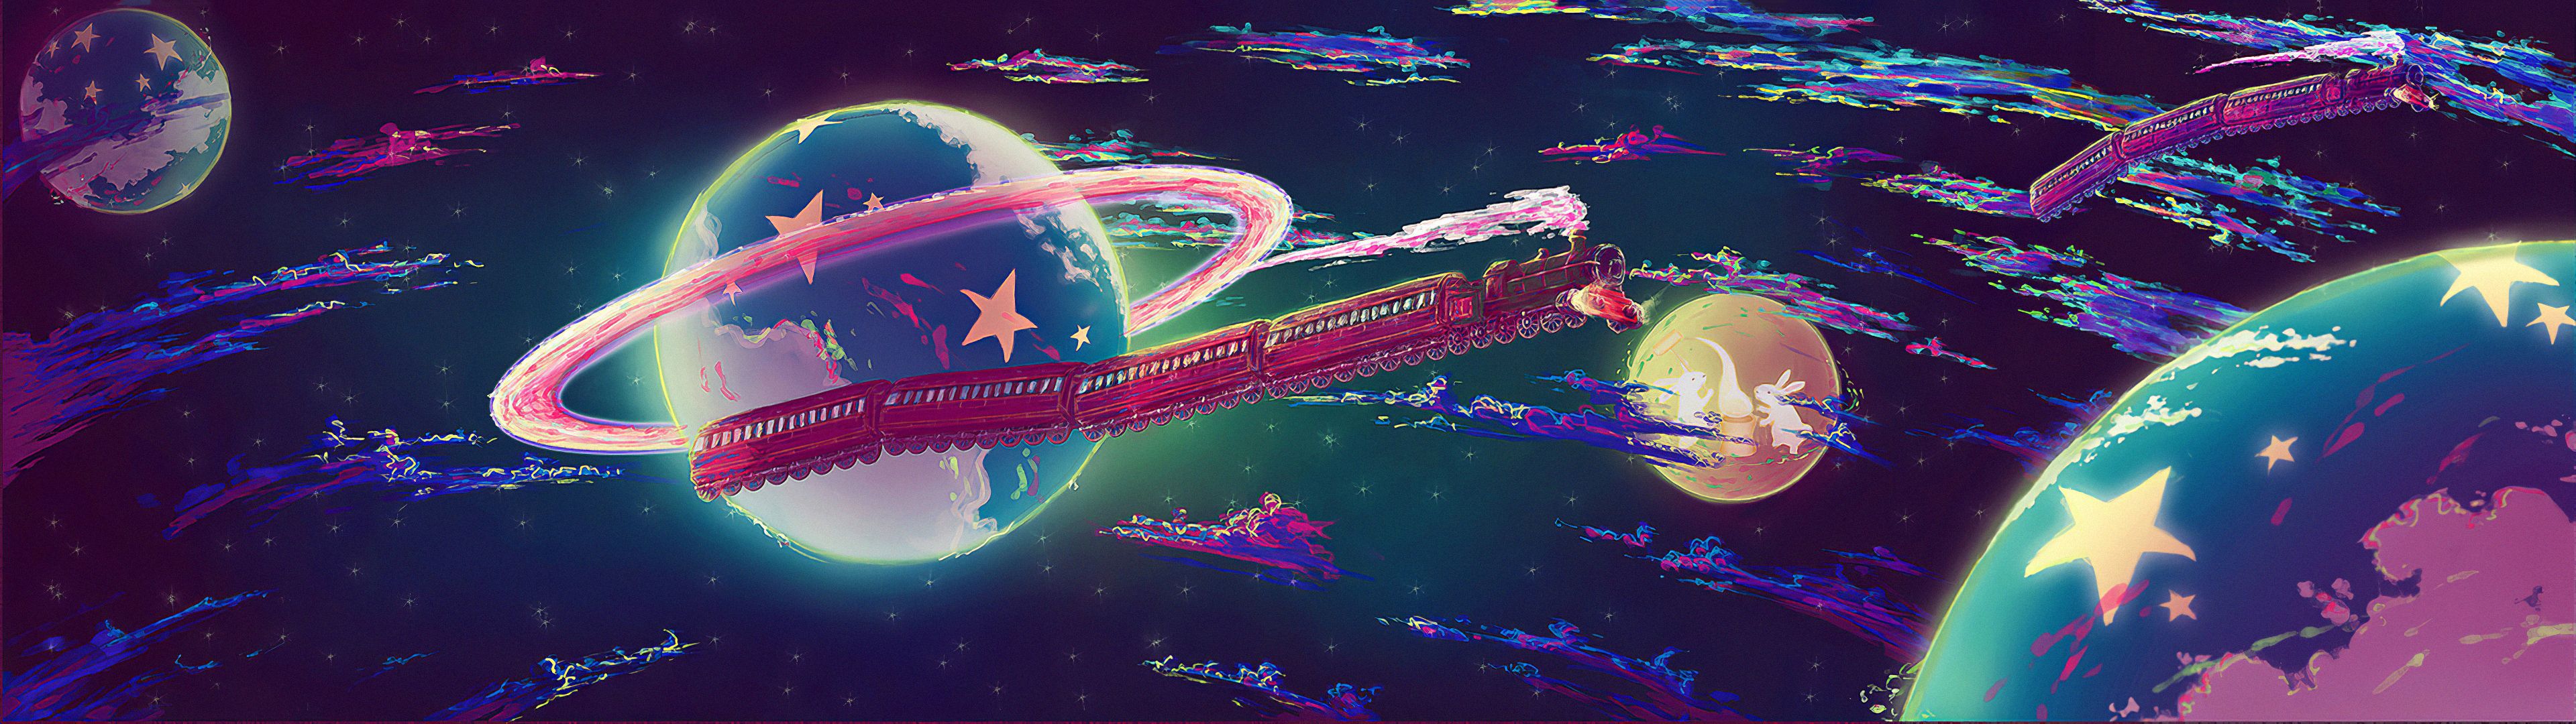 Space Train 4k, HD Artist, 4k Wallpaper, Image, Background, Photo and Picture